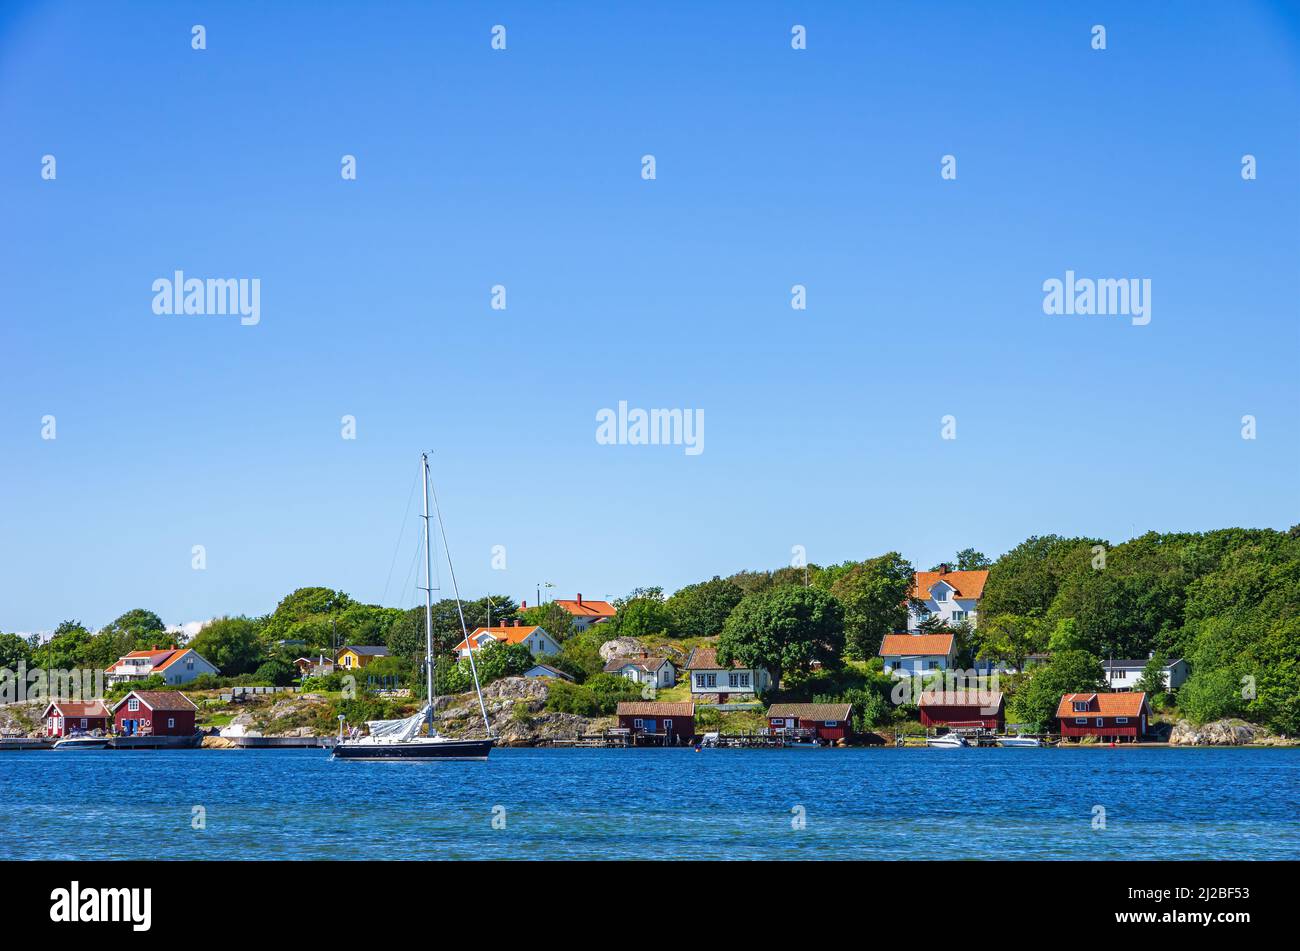 Picturesque coastal landscape with sailboat and boat sheds, South coast of North Koster Island, Bohuslän, Västra Götalands län, Sweden. Stock Photo